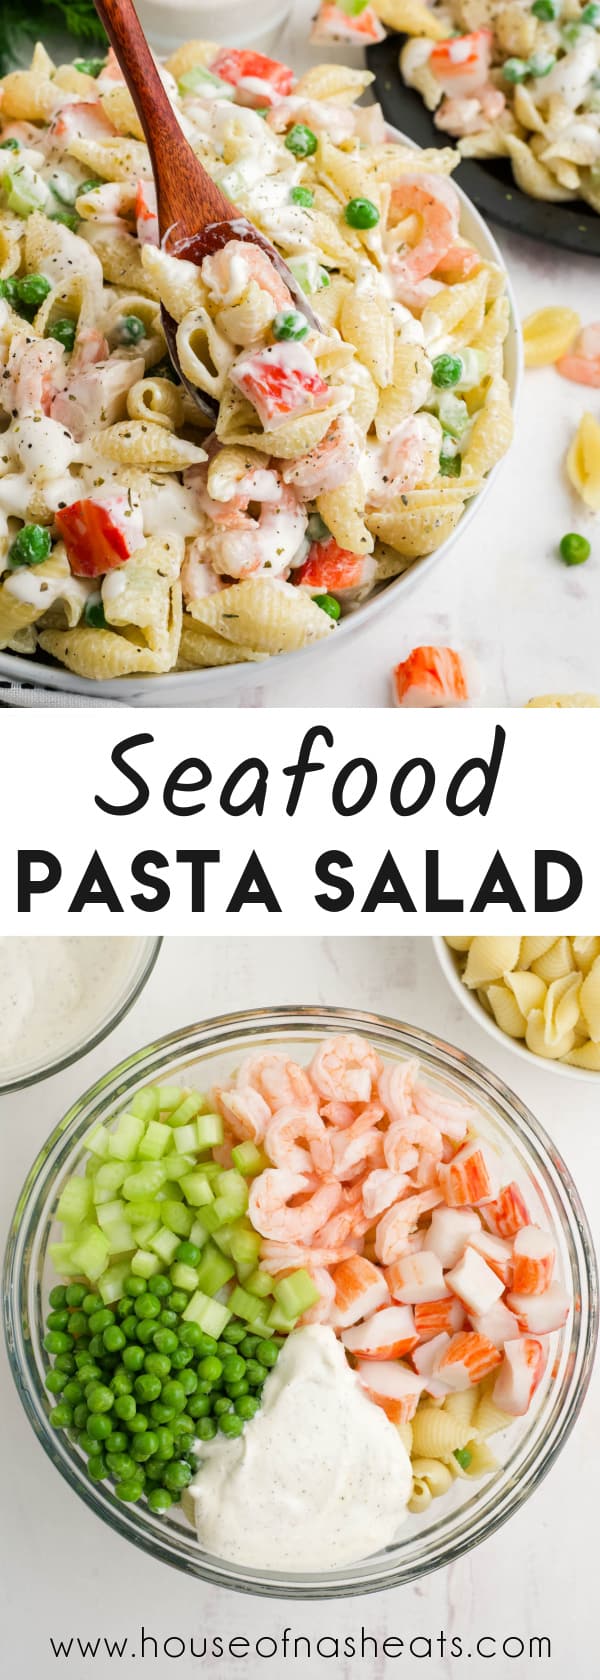 A collage of images of seafood pasta salad with text overlay.